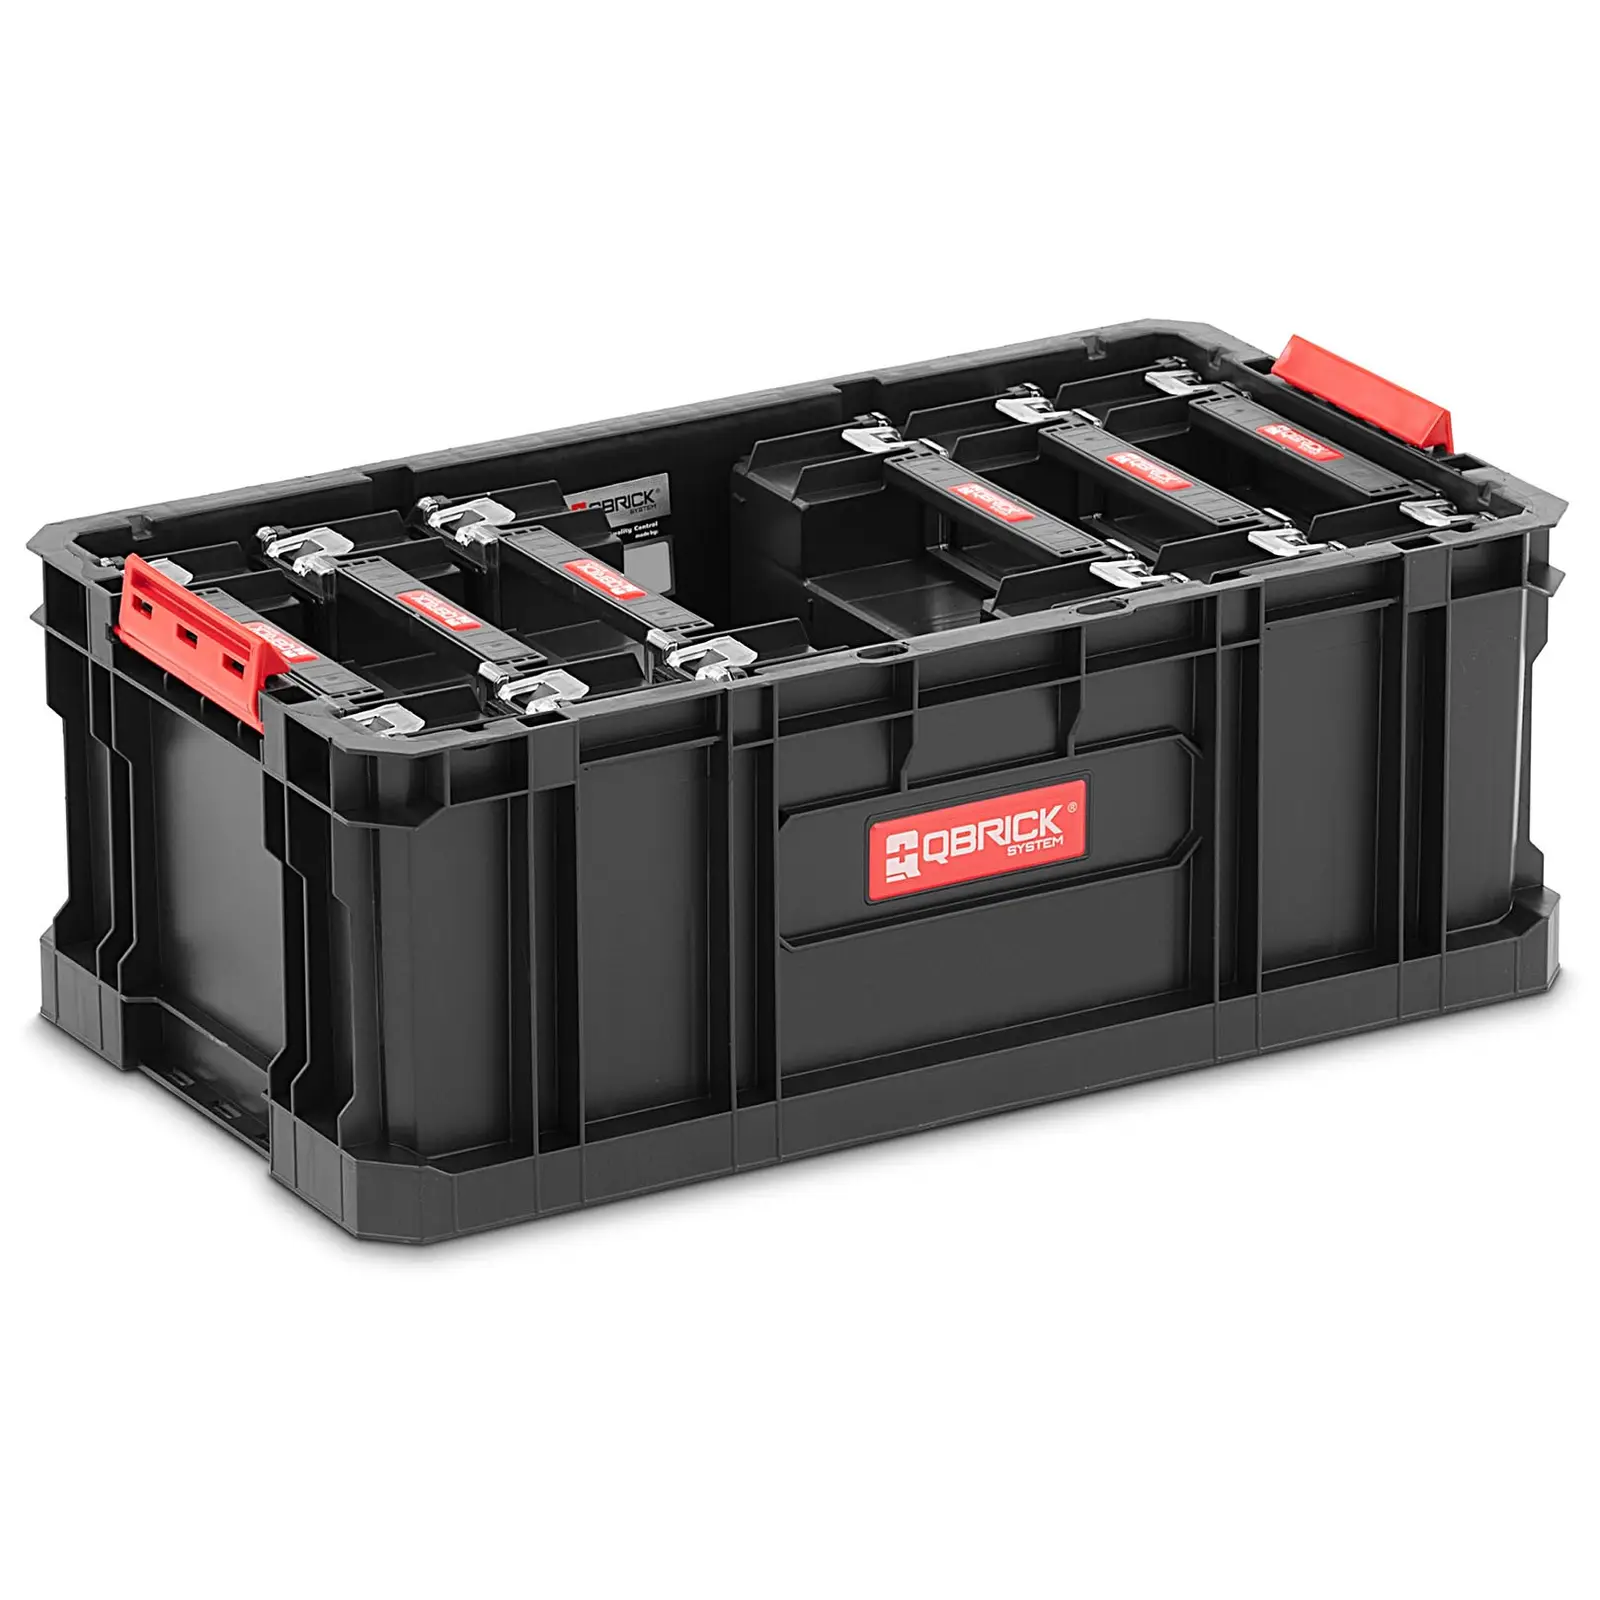 Set Toolbox System Two 200 including 6 Organizer Multi